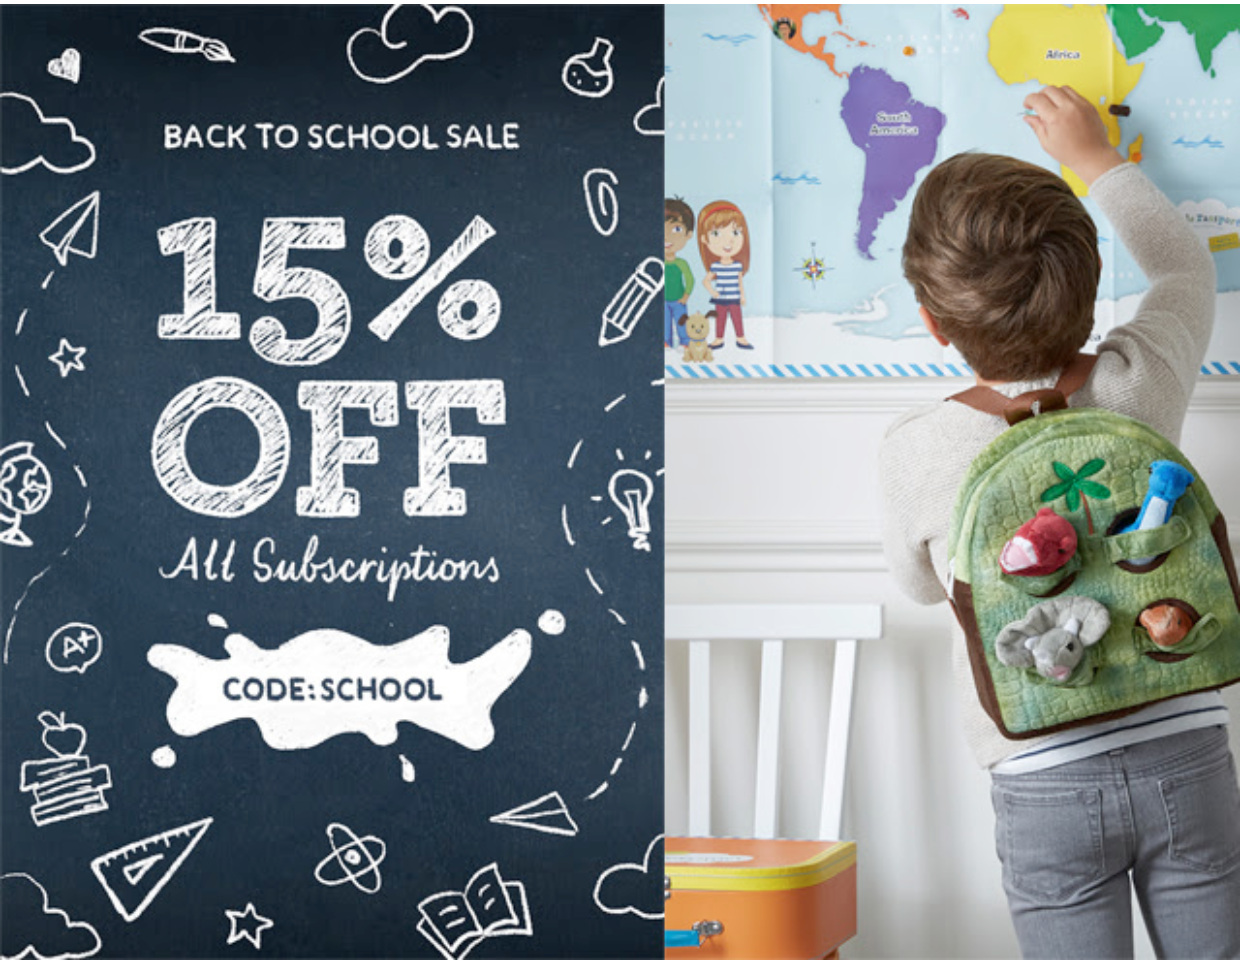 Little Passports Coupon – 15% Off Subscriptions!